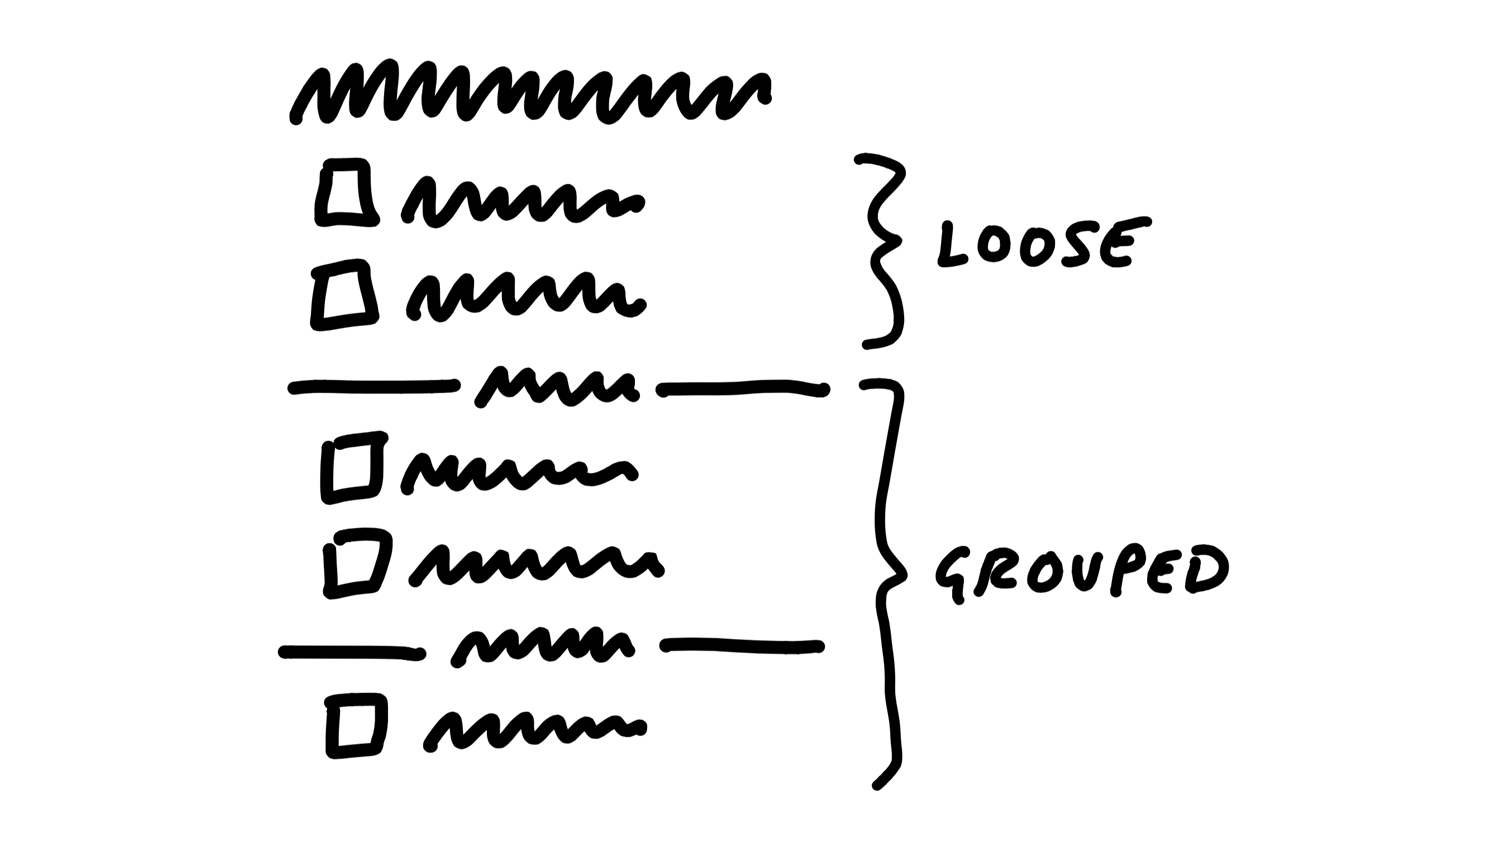 A sketch drawn roughly with a fat-tipped marker. Squiggly lines suggest a to-do list with items. The first two items appear directly under the to-do list name. The rest of the items are separated by dividers. The top items with no divider above are labeled Loose and the divided ones below are labeled Grouped.